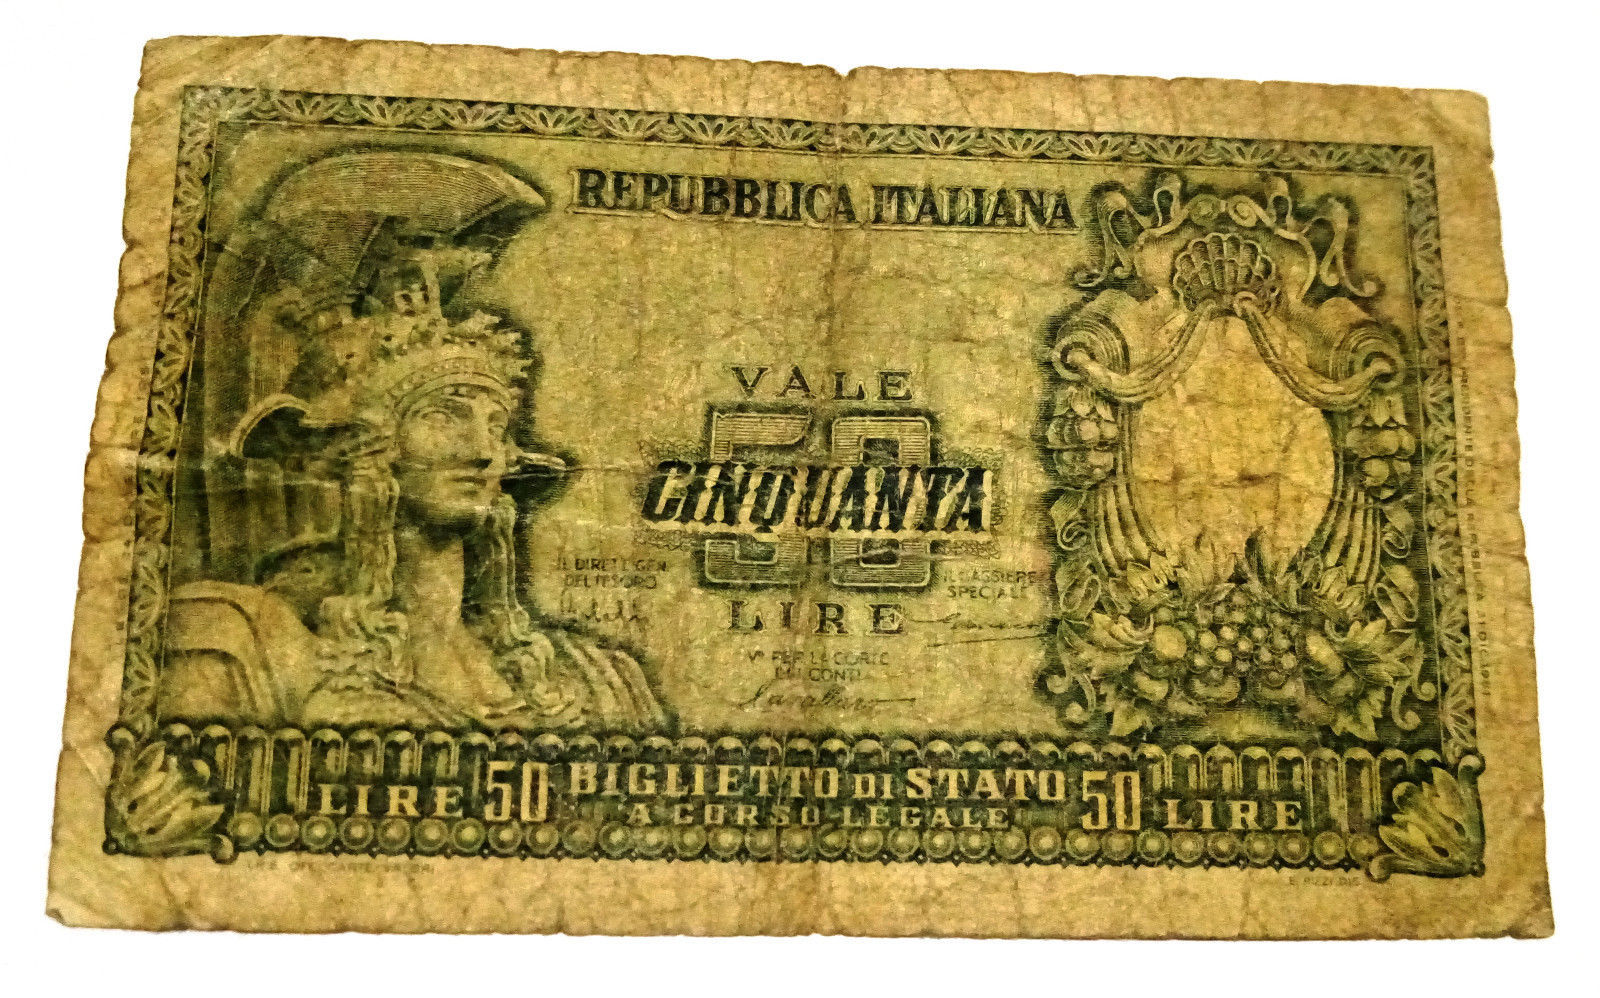 50 lire italy 1951 banknote - $9.90